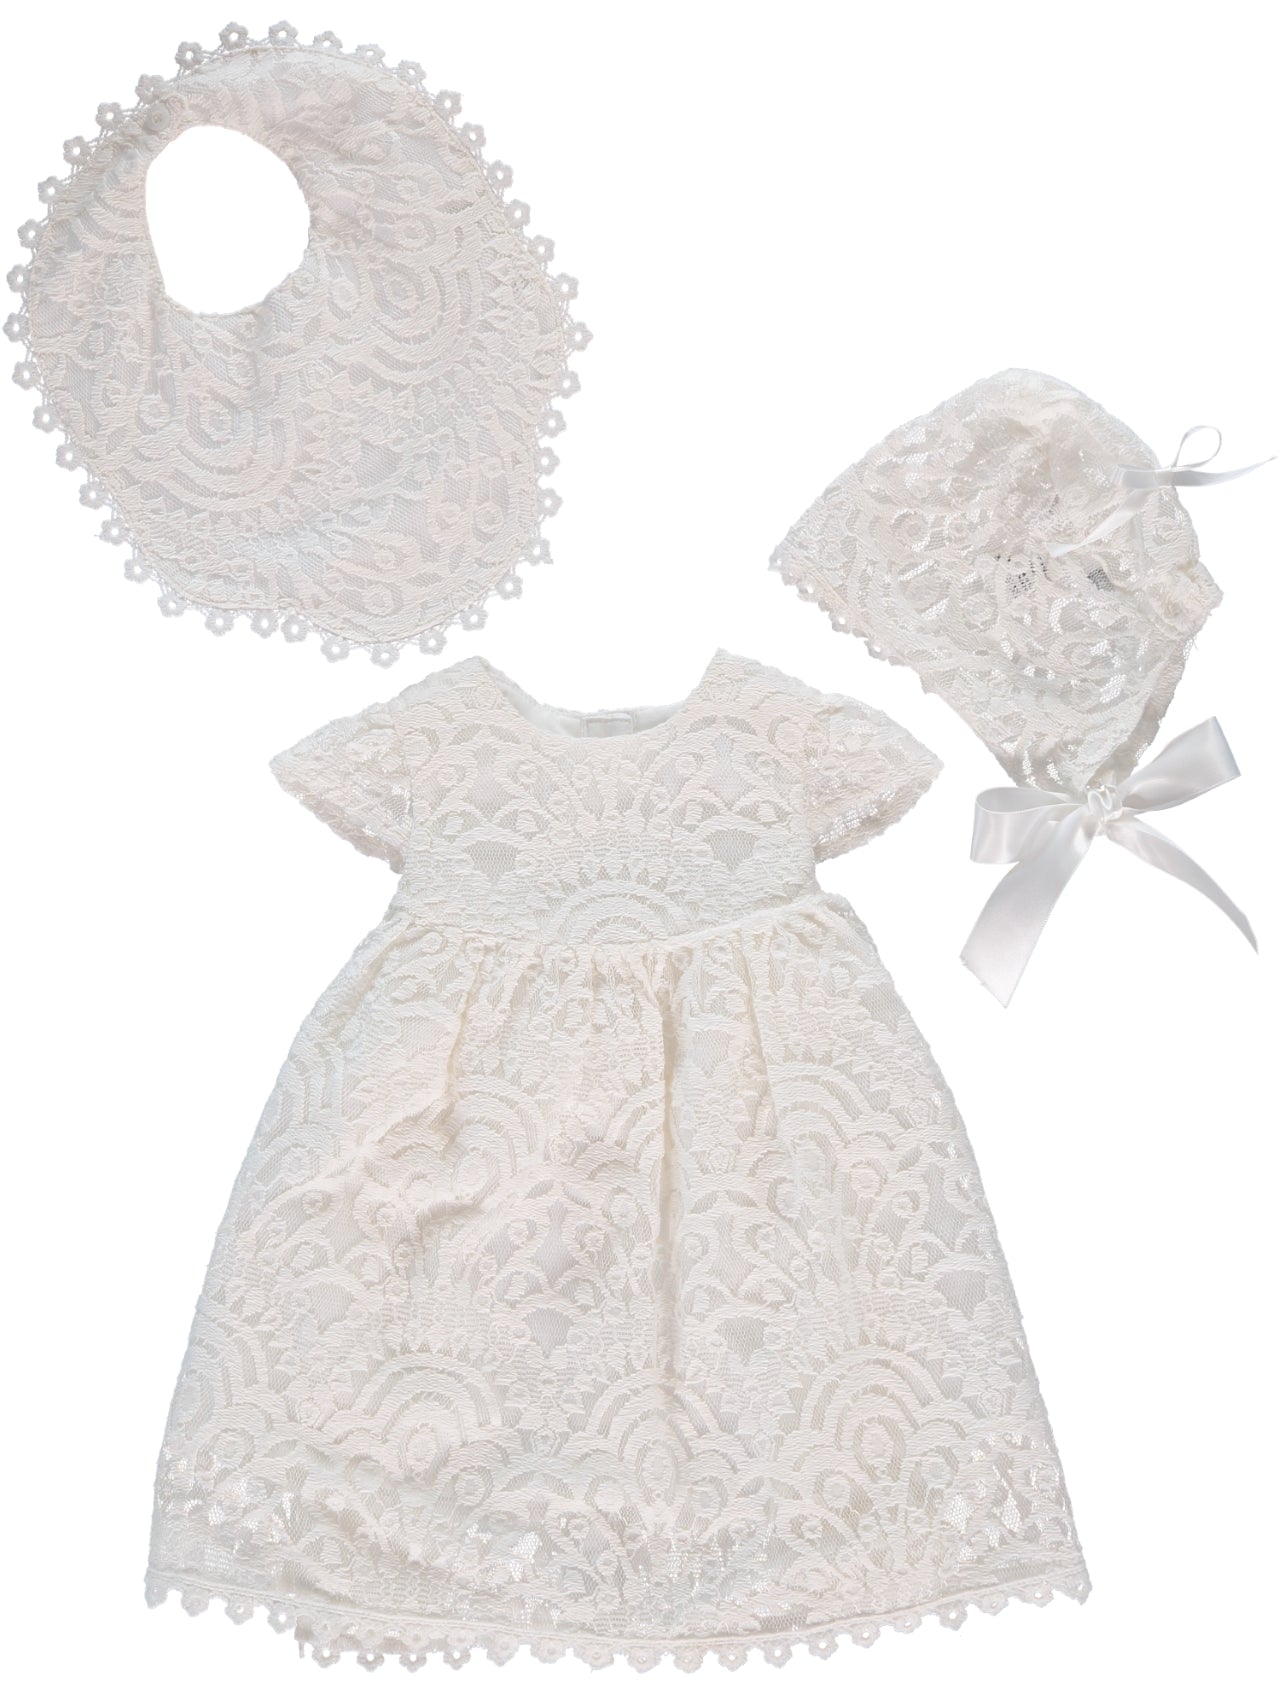 Wholesale Baby Girl Christening Lace Dress with Matching Bonnet 7 - Imagewear